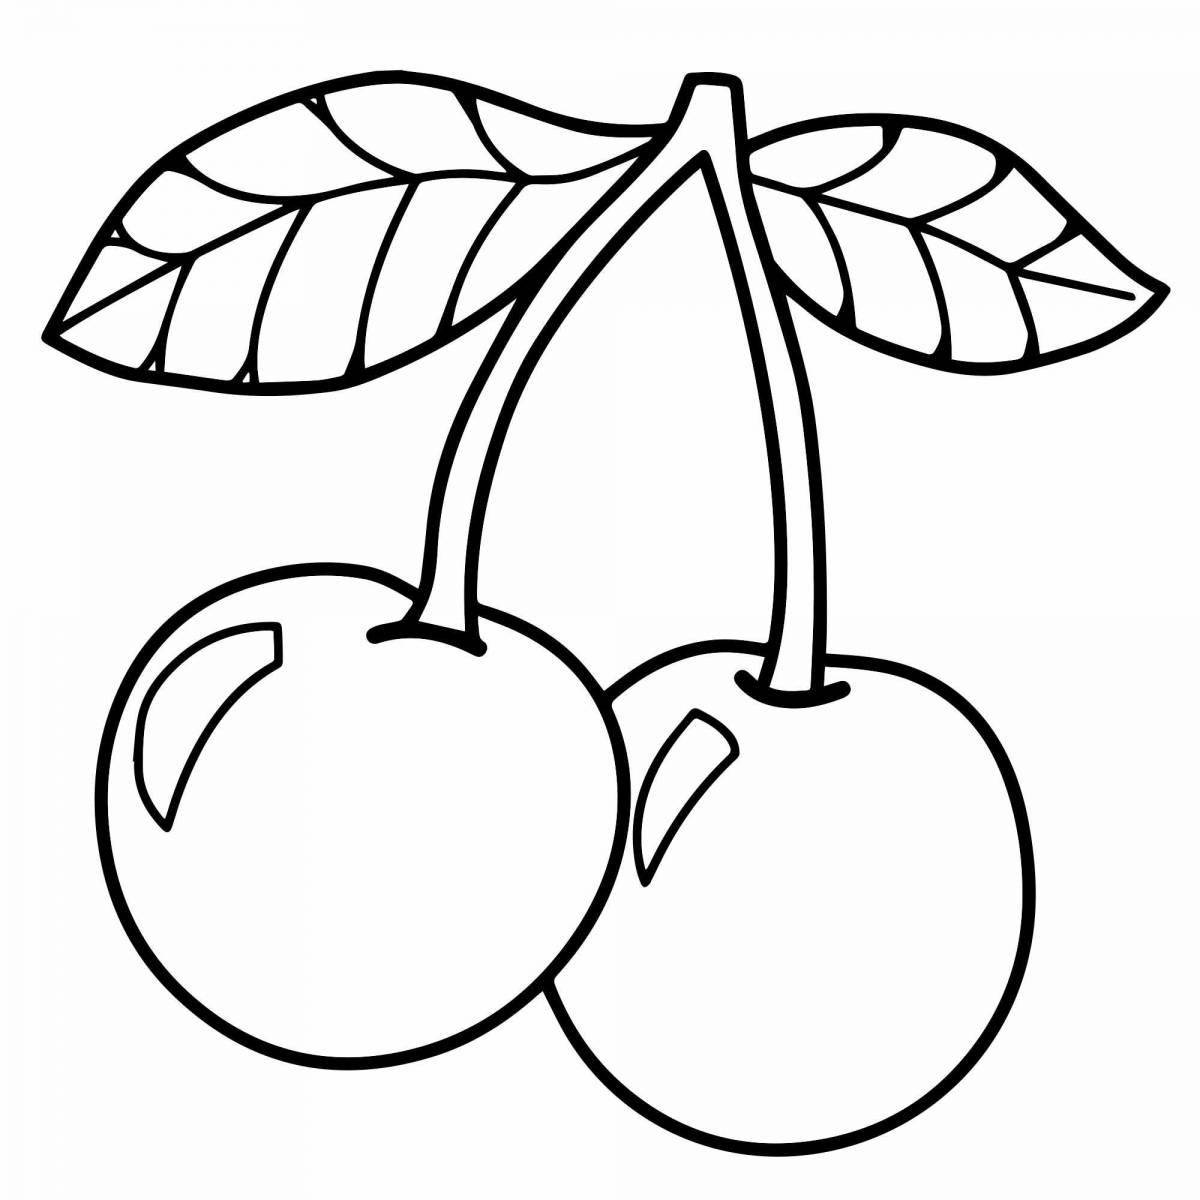 Luminous cherry coloring pages